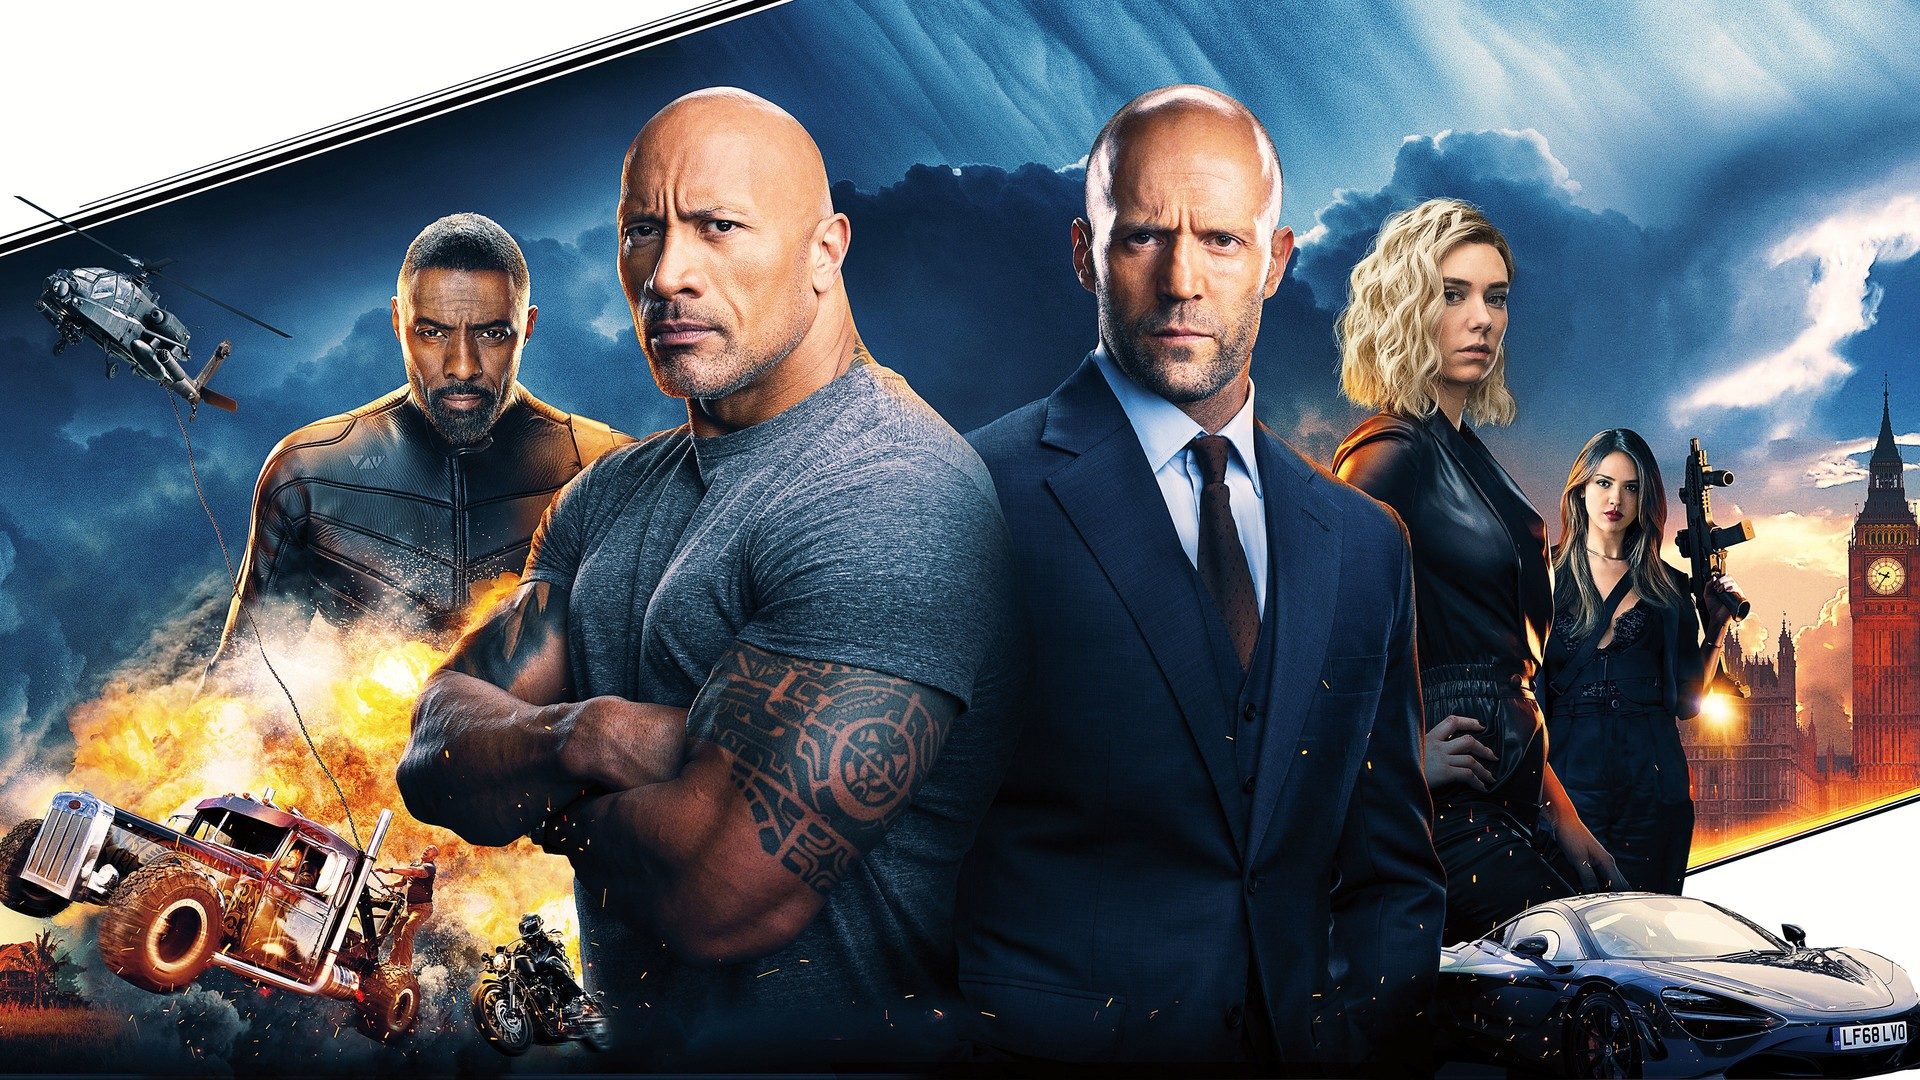 hobbs and shaw